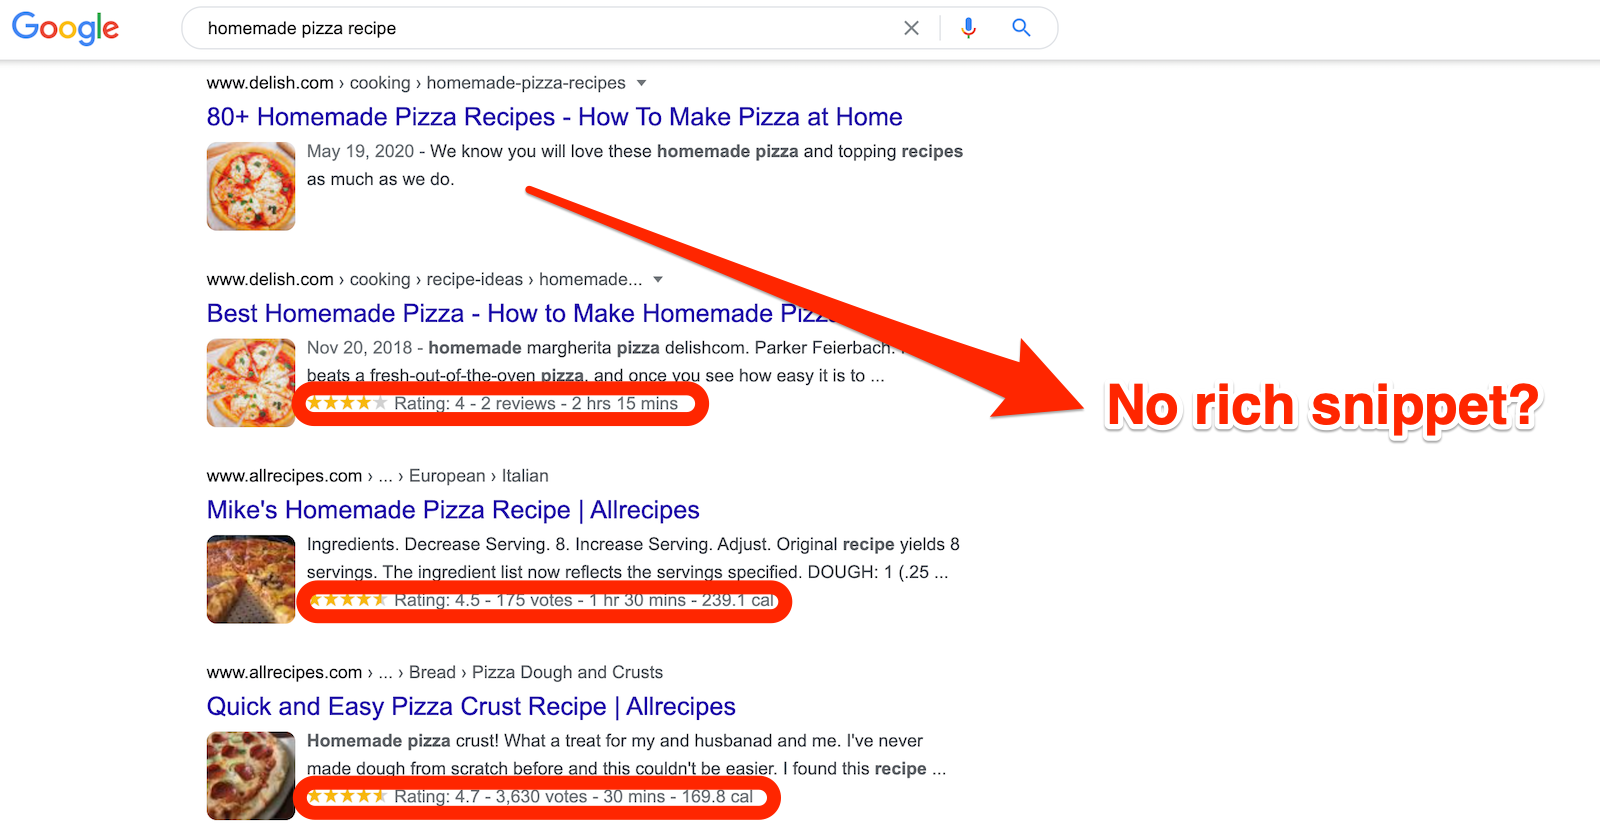 Why Your Rich Snippets Aren’t Showing